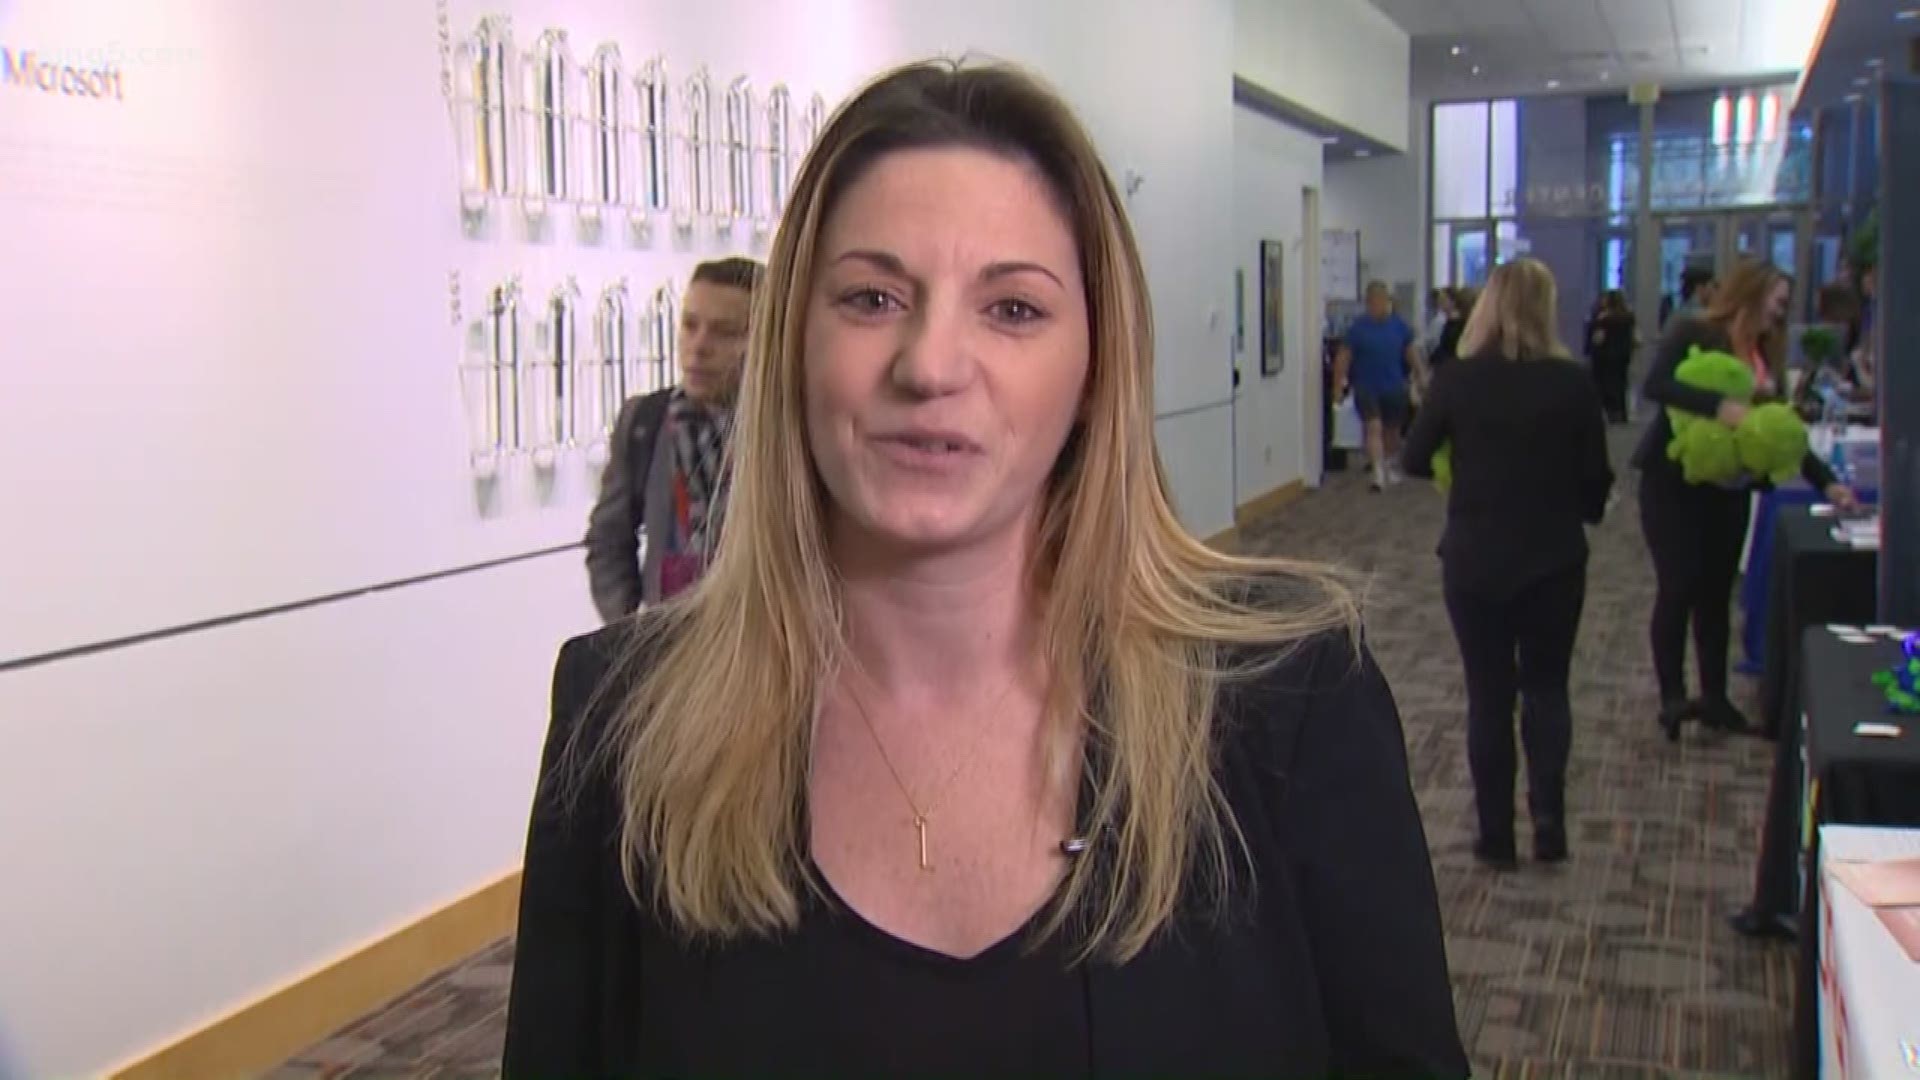 KING 5 spoke with Sarah Haggard, the CEO and Founder of Tribute, a modern mentorship app. She talks about what the Women in Cloud Summit means for women in tech.